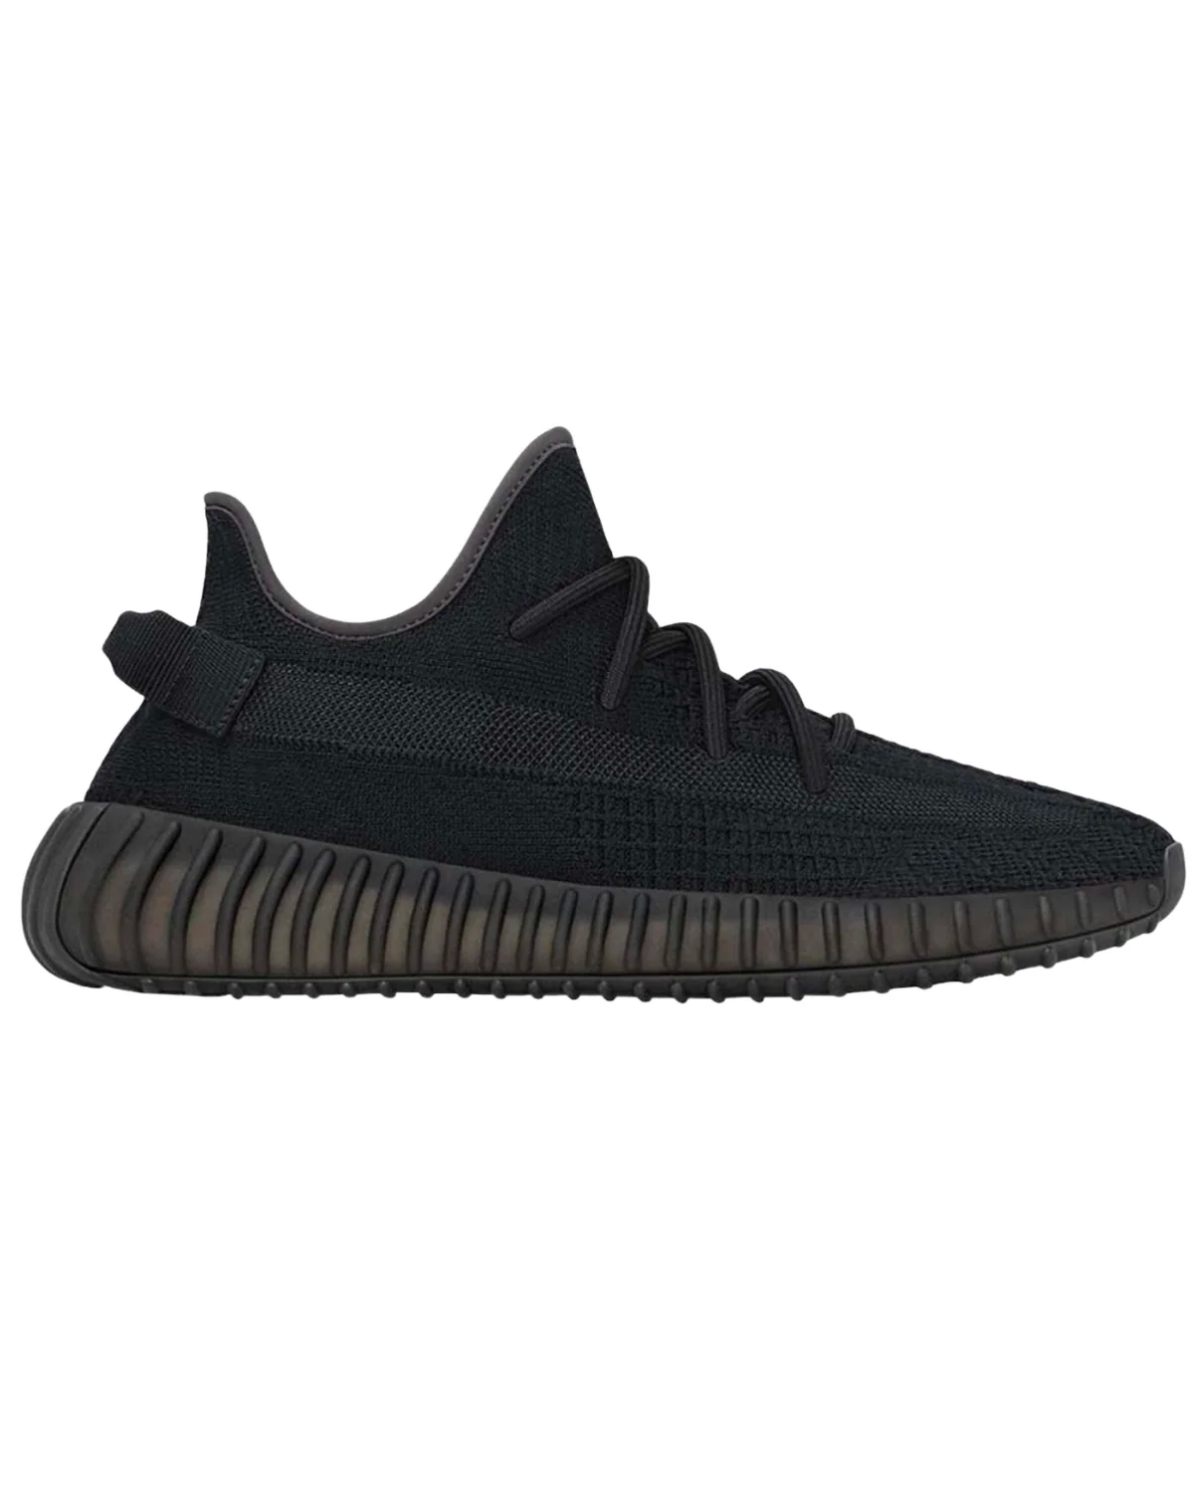 adidas Yeezy Boost 350 V2 Core Black Red - Dropsy.Store